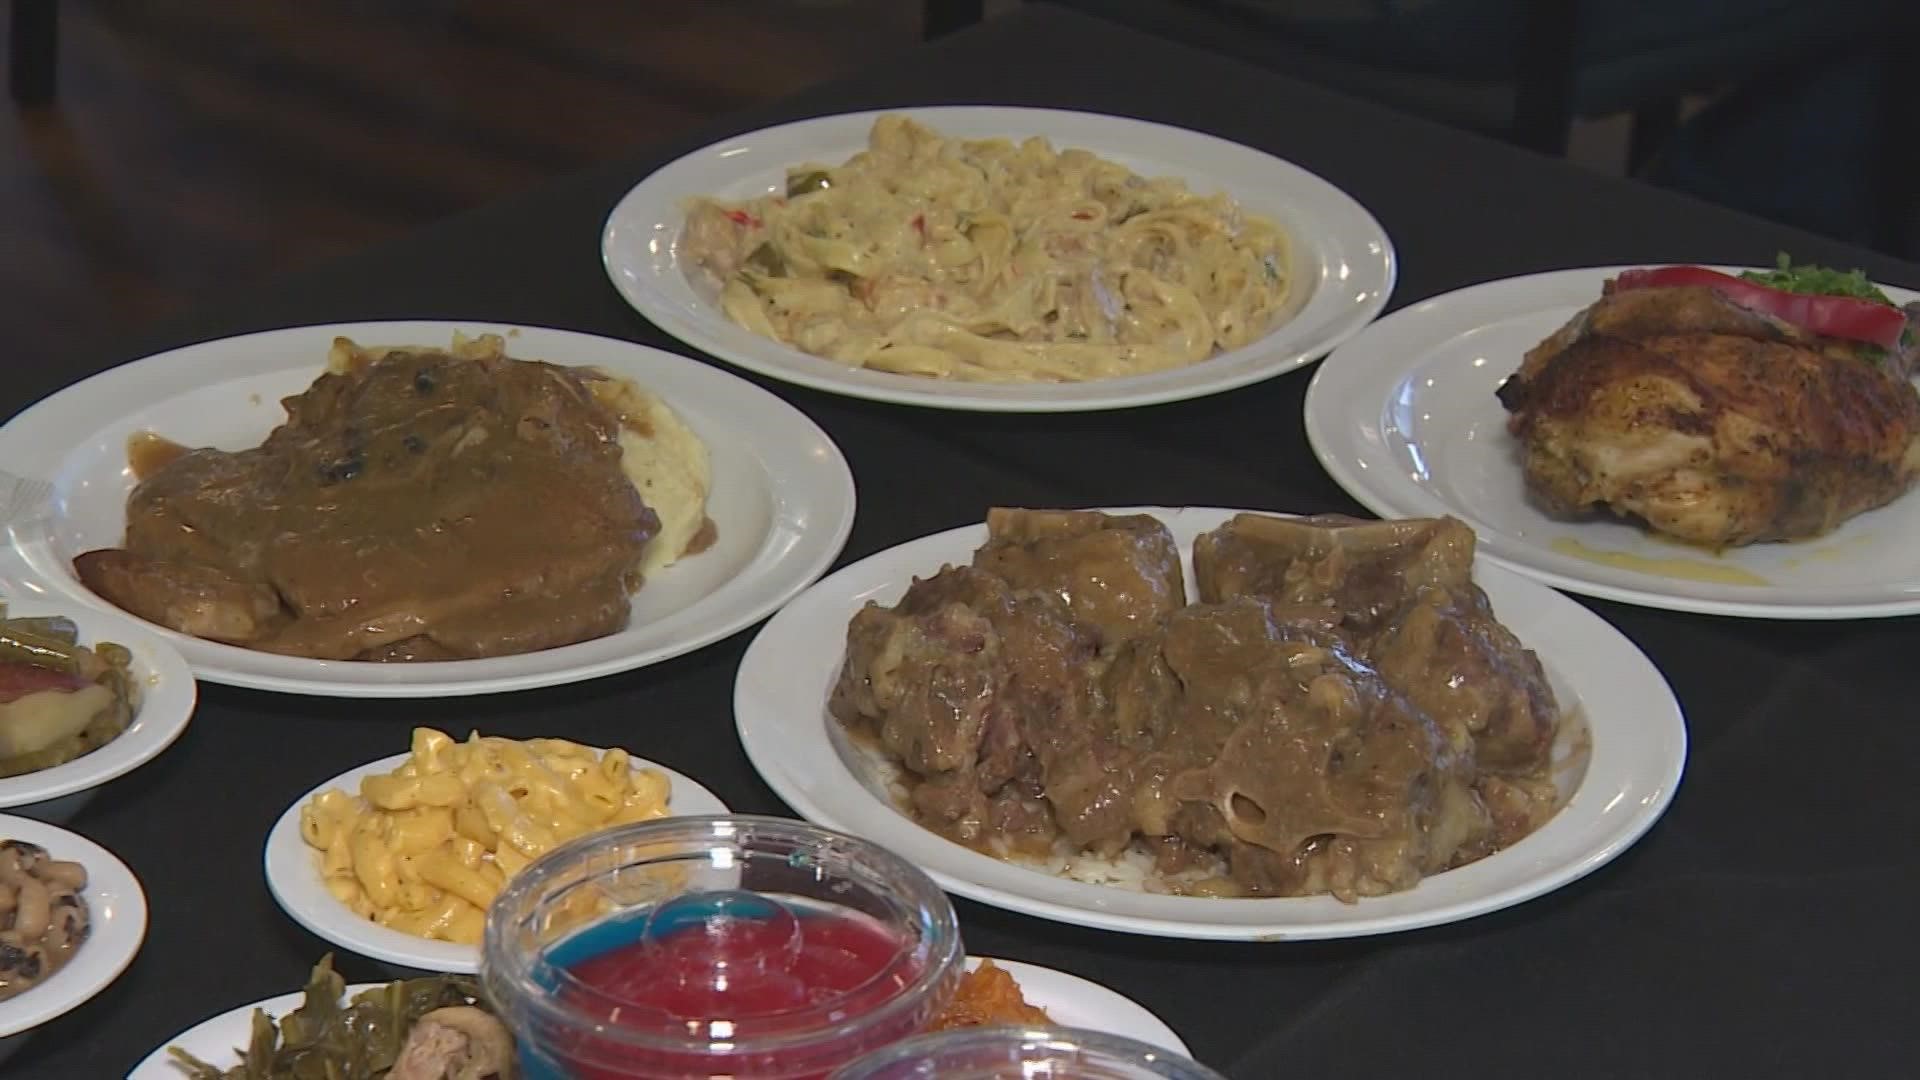 Black Restaurant Week Houston is gearing up to start on Friday and run through April 10.